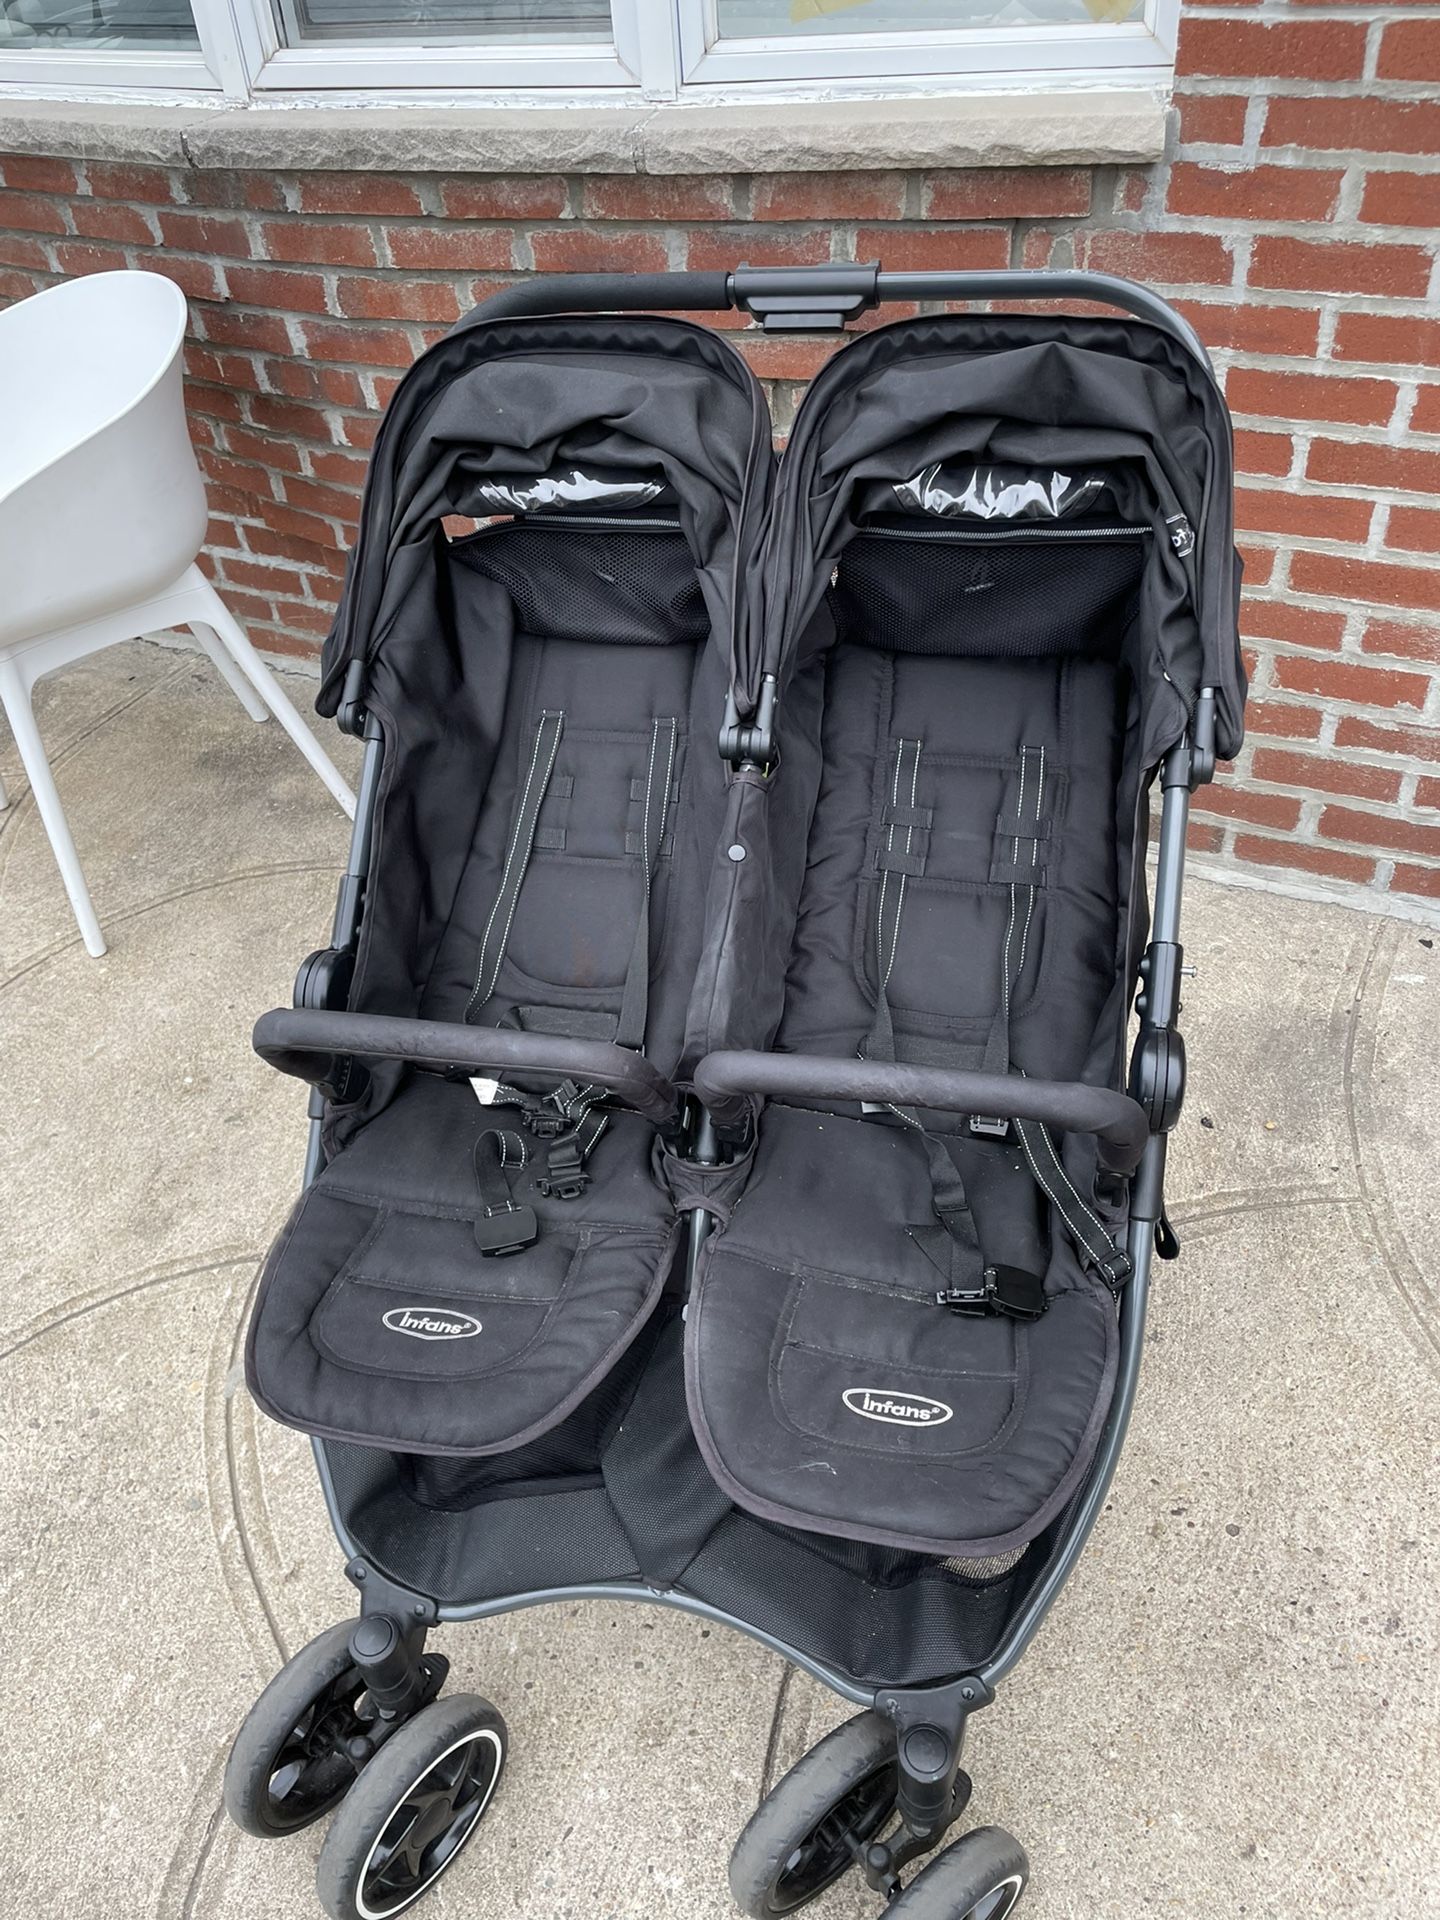 Used Infans Double Stroller - Great Condition